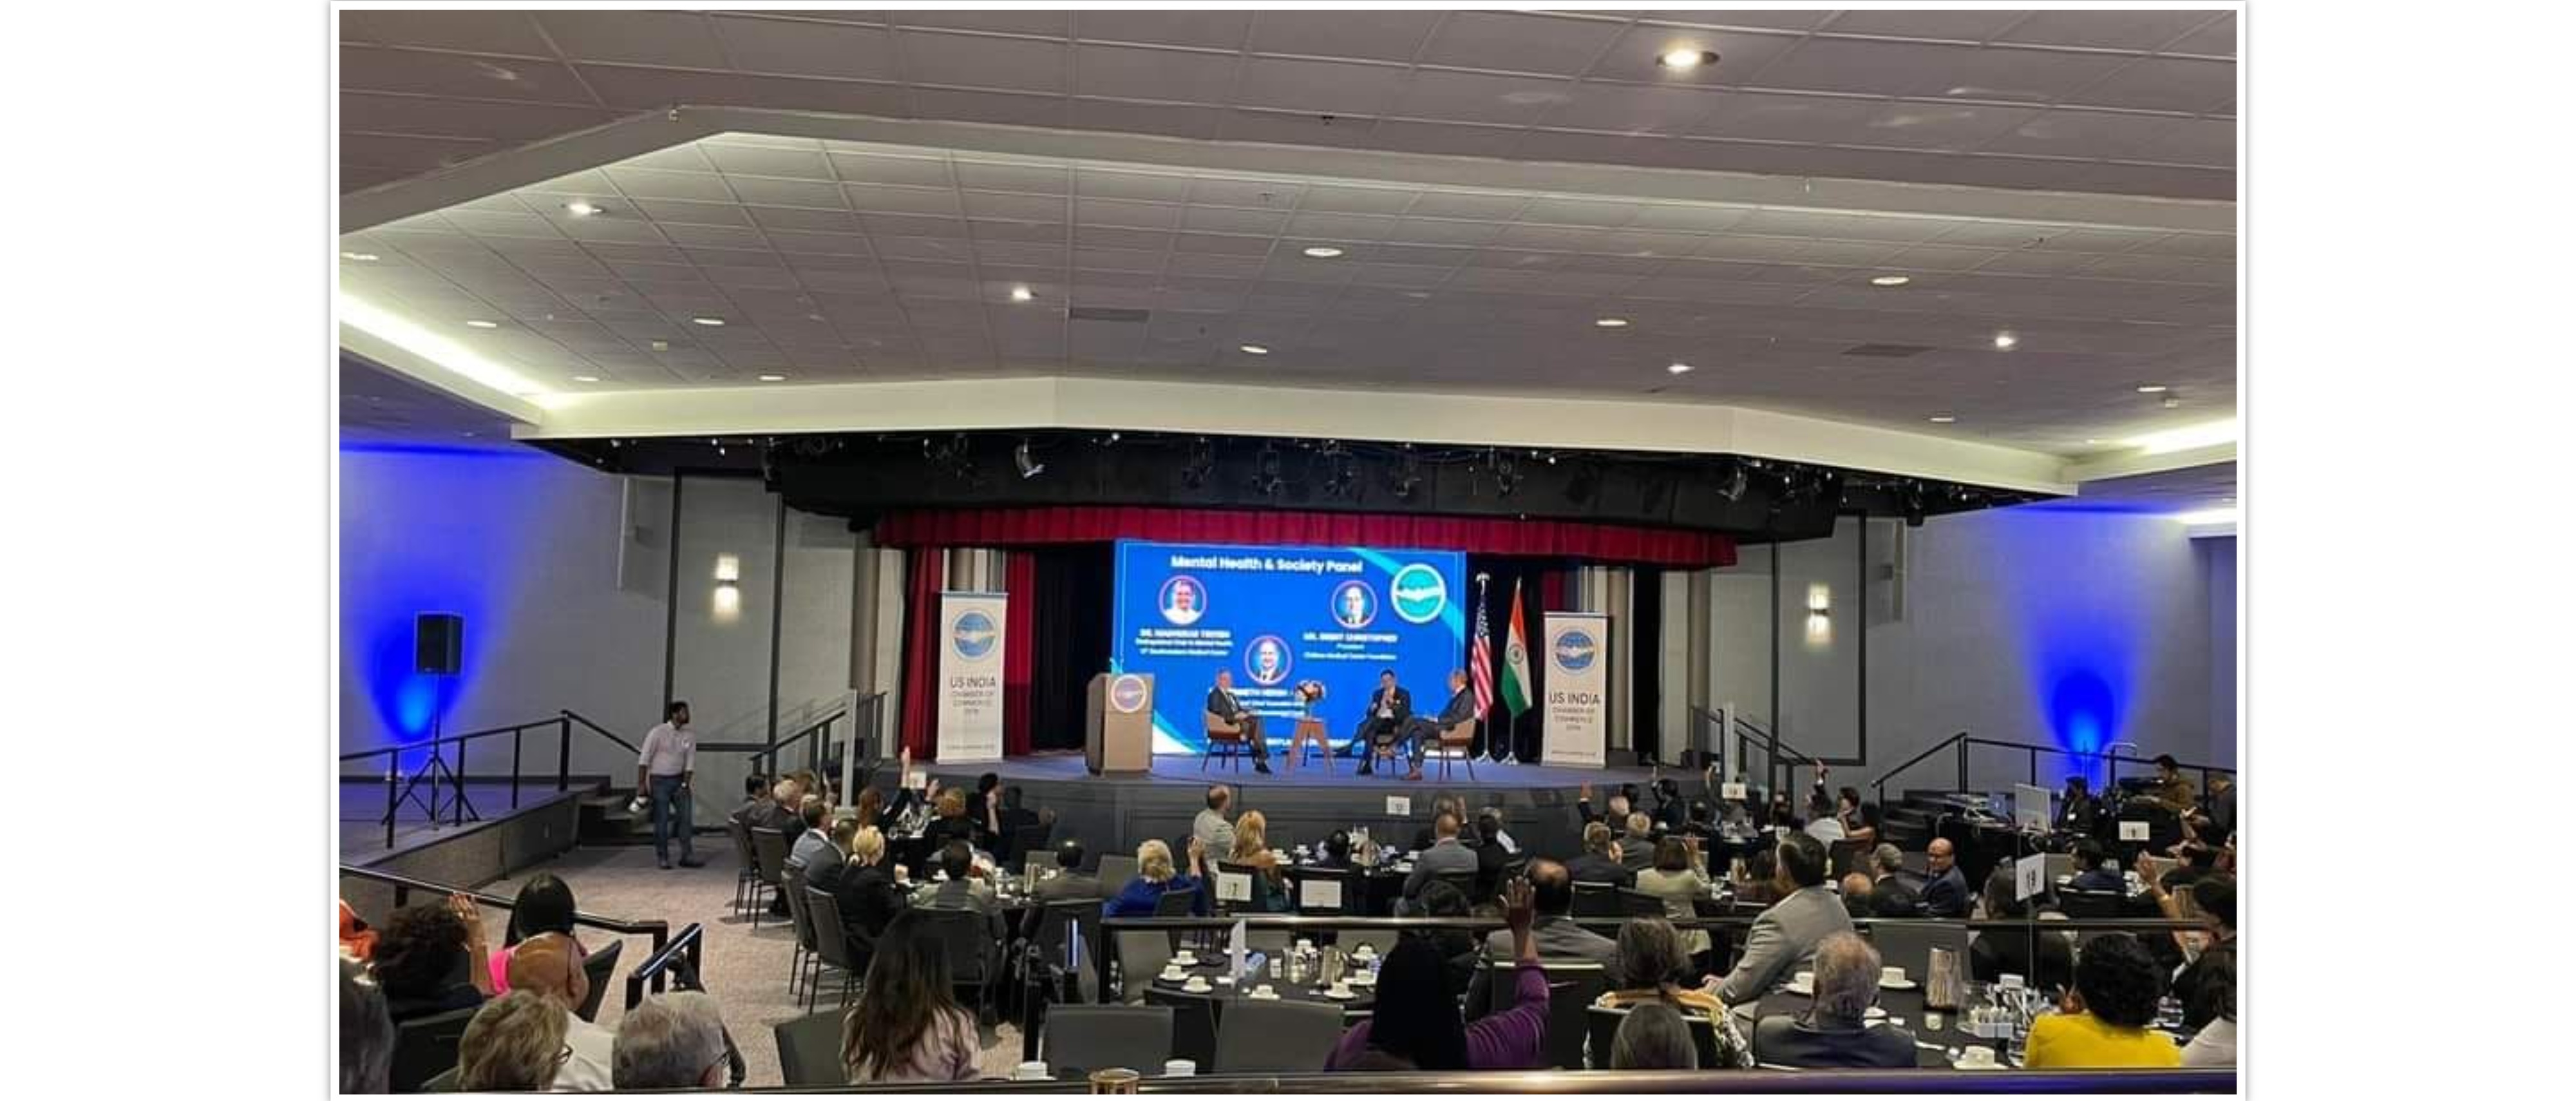  Consul General participated in the  ‘Wellness and Workplace Conference’ organized by the US India Chamber of Commerce of Dallas Fort Worth on September 23,2022